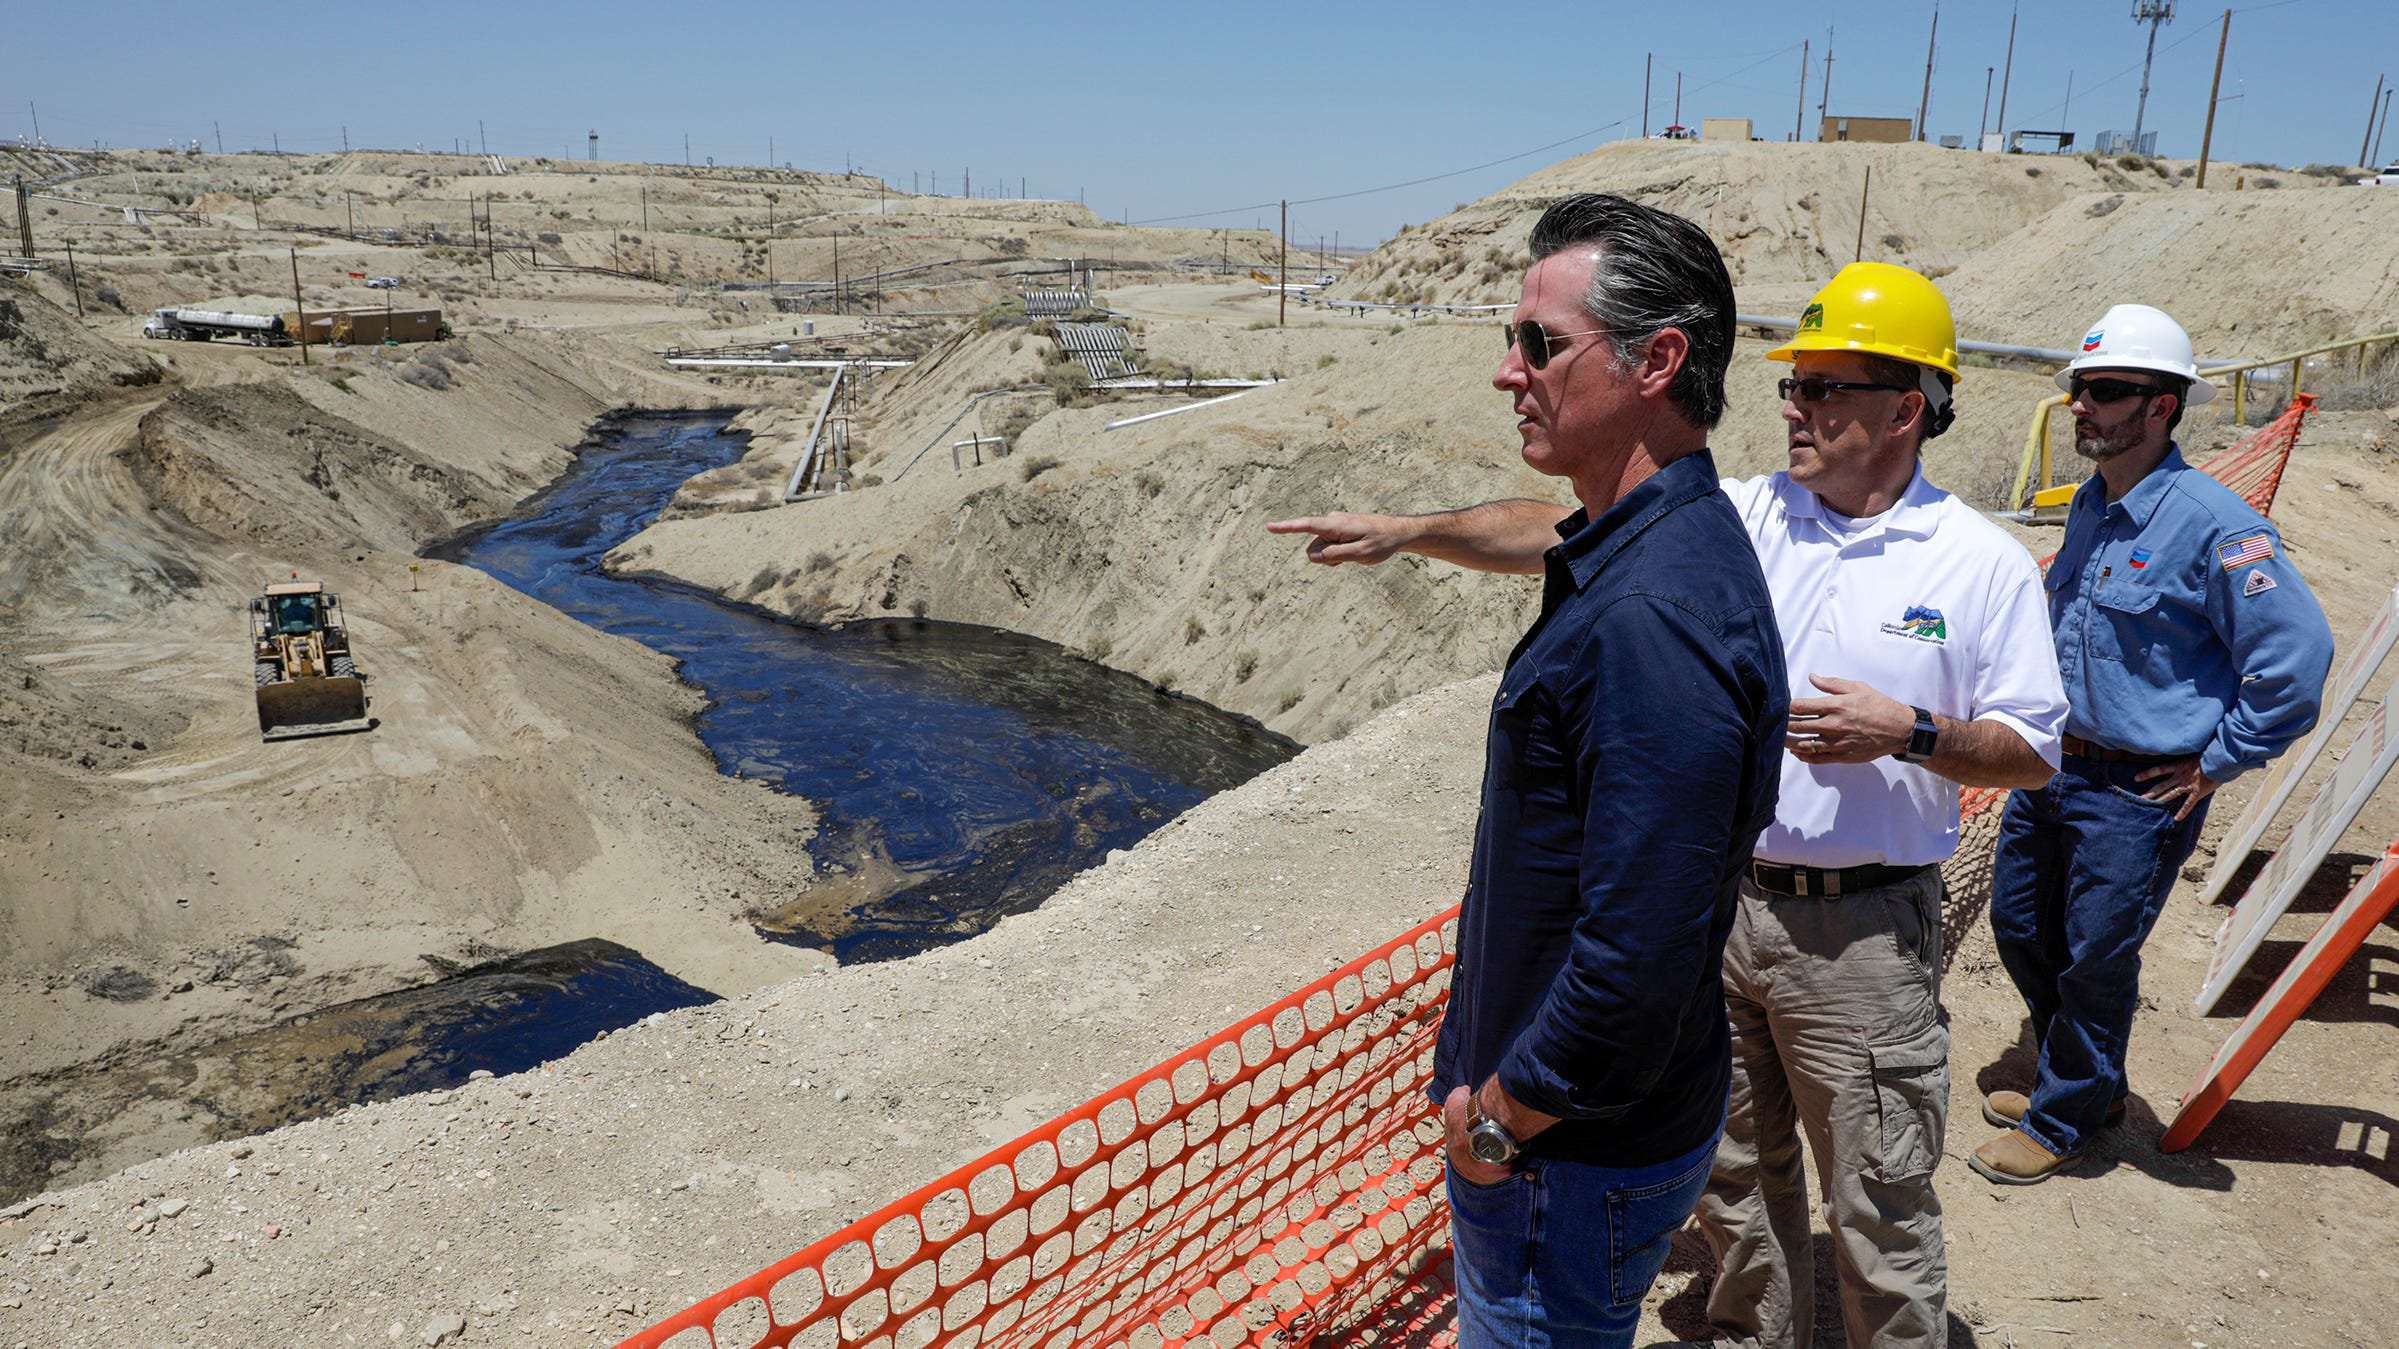 image for California Gov. Gavin Newsom orders ban on new fracking permits by 2024, wants to stop all oil drilling by 2045